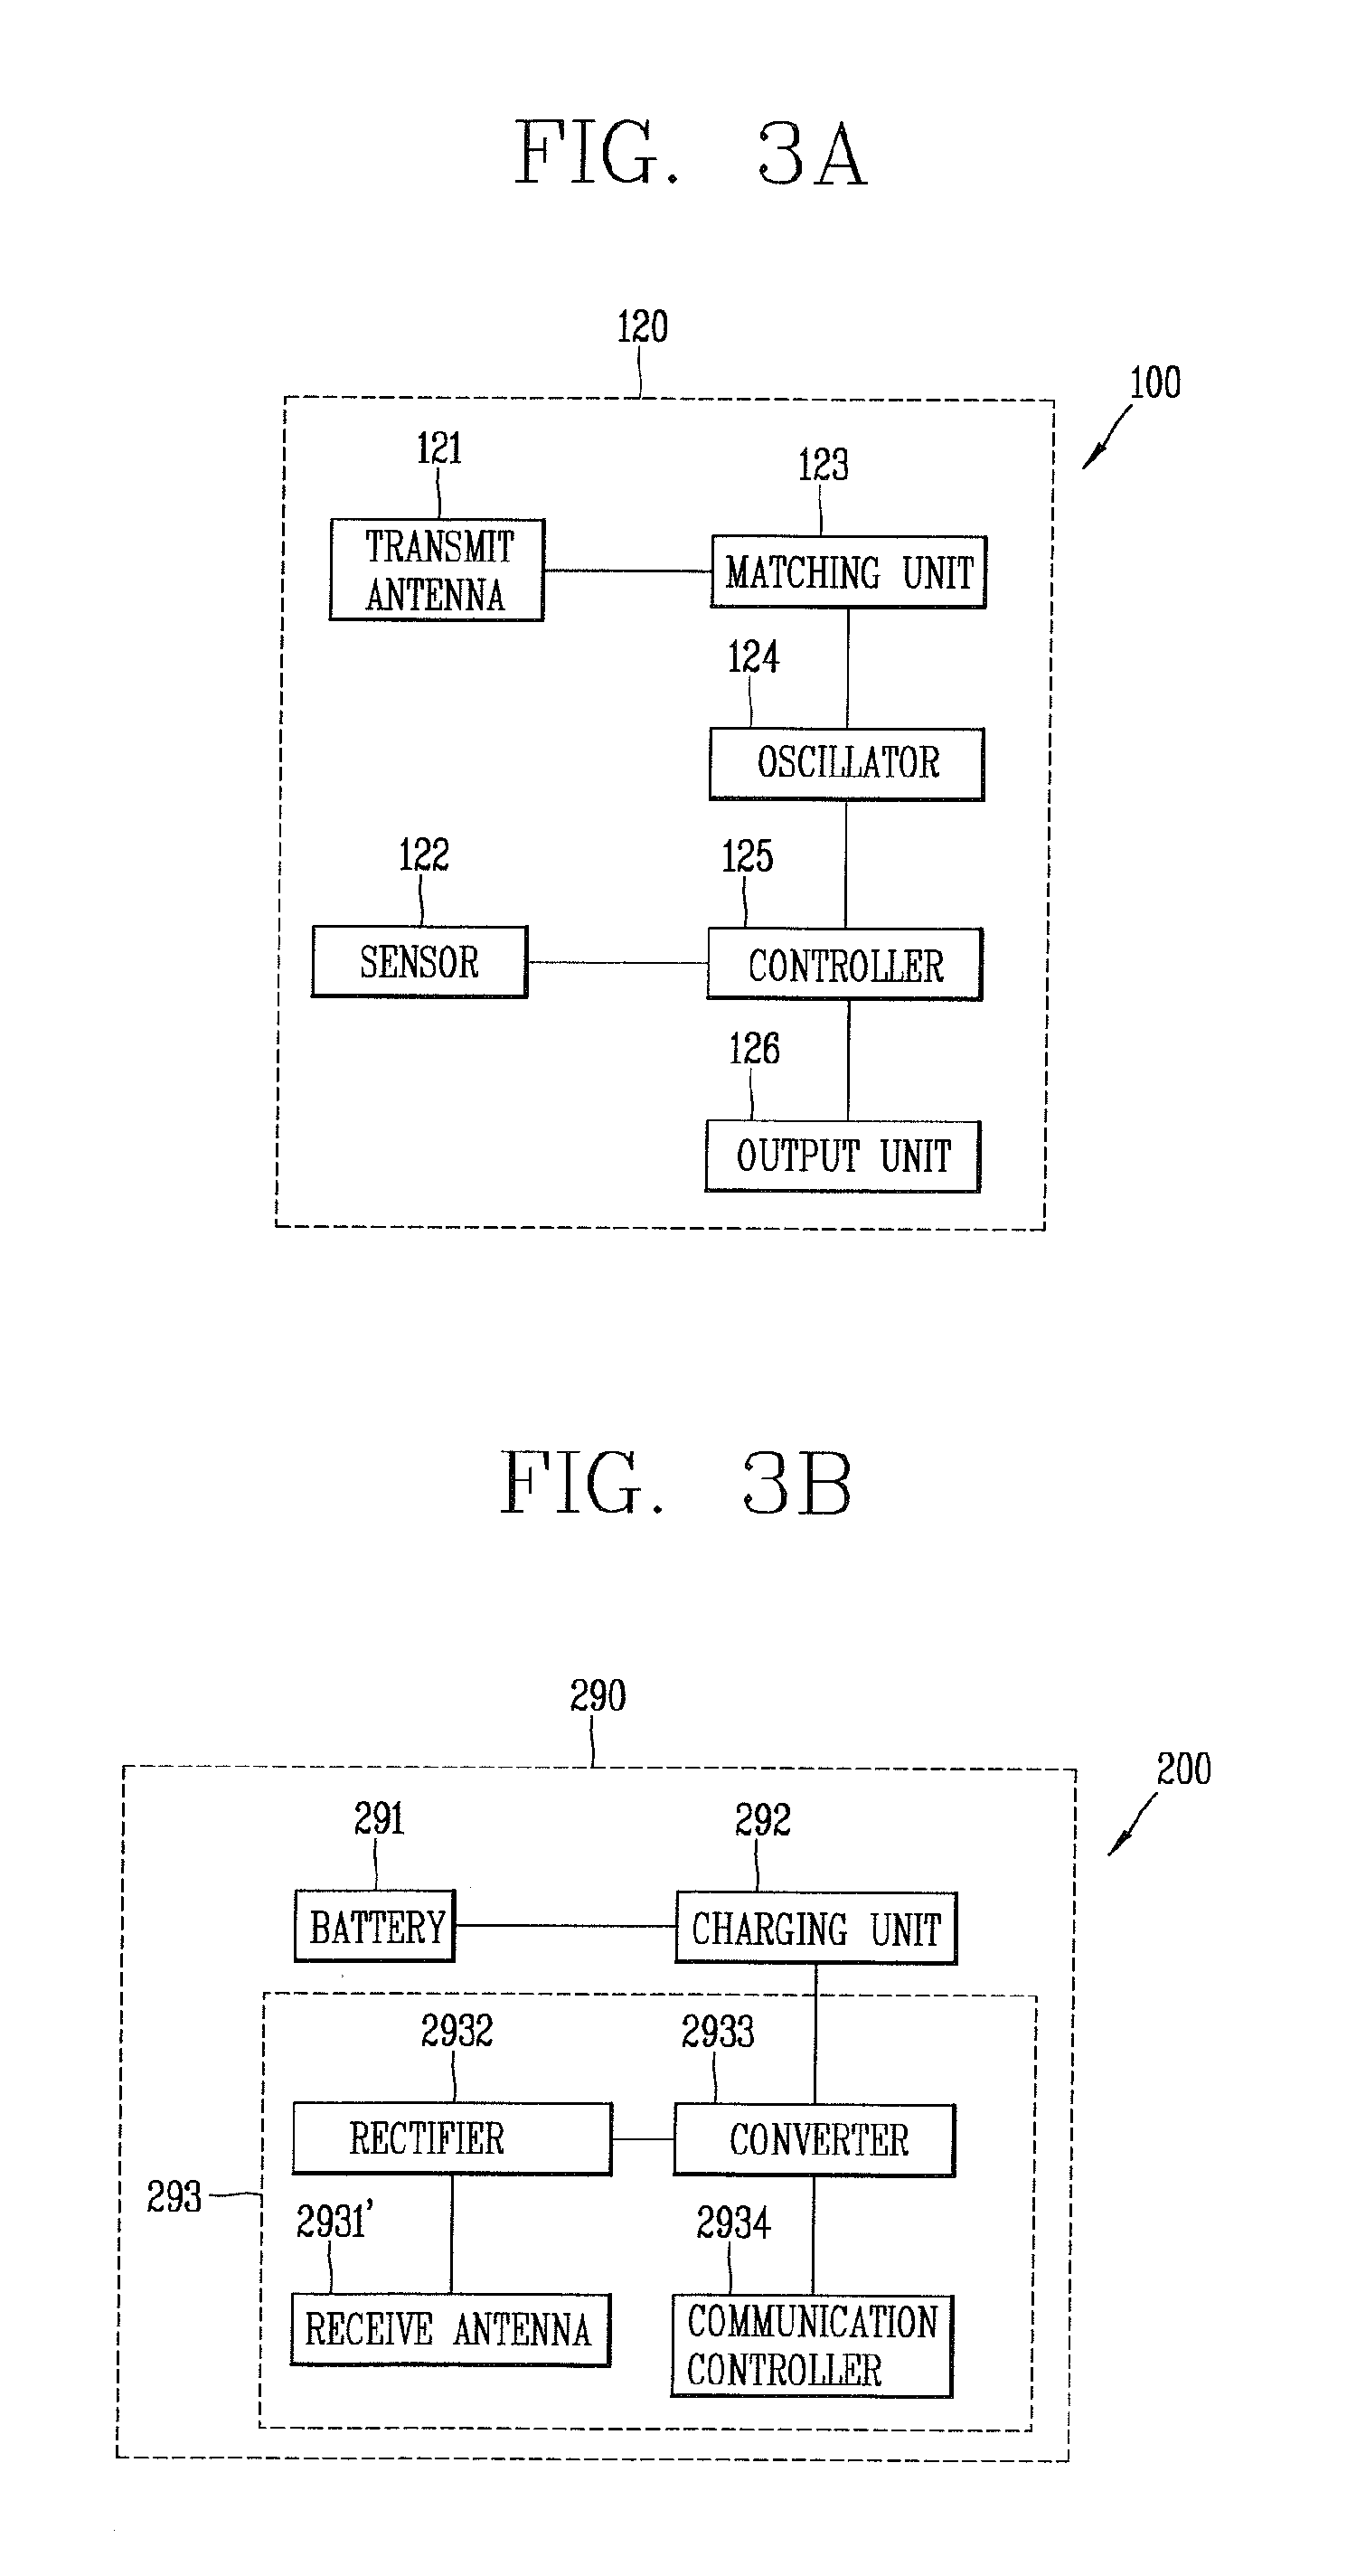 Apparatus and system for providing wireless charging service